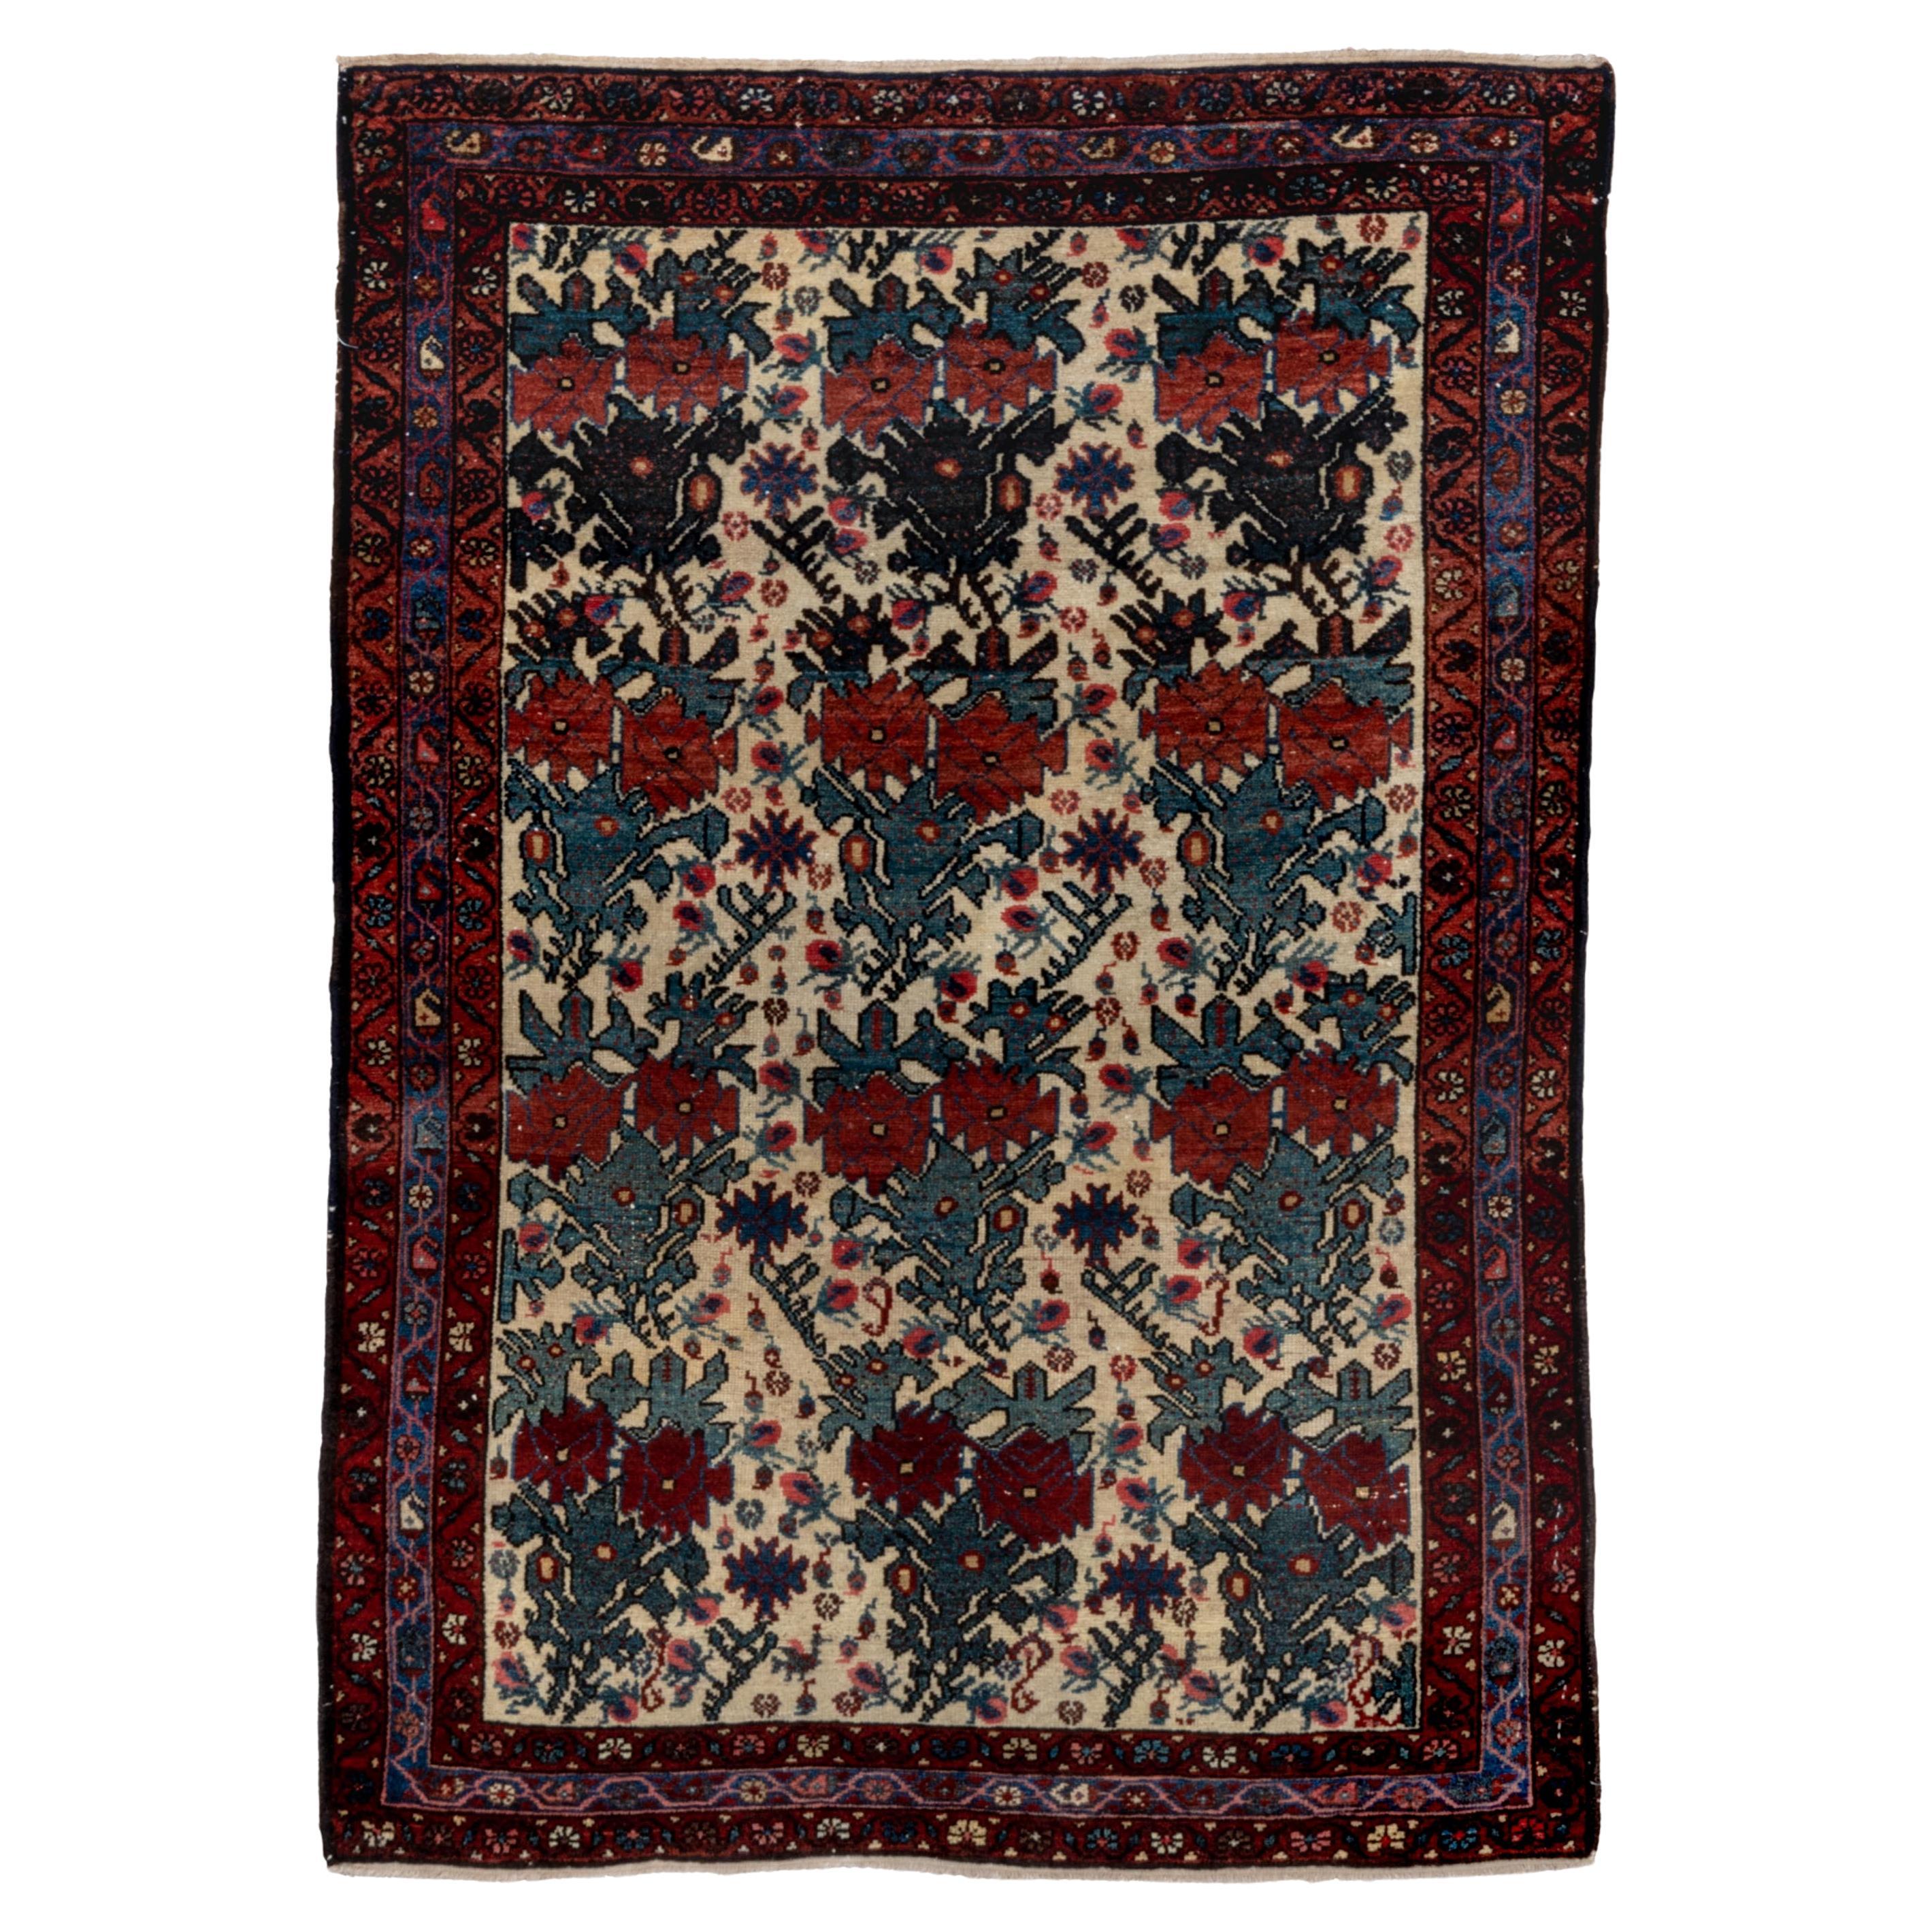 12 Rose Florets Across Center Field - Malayer Rug - Antique 1940 For Sale